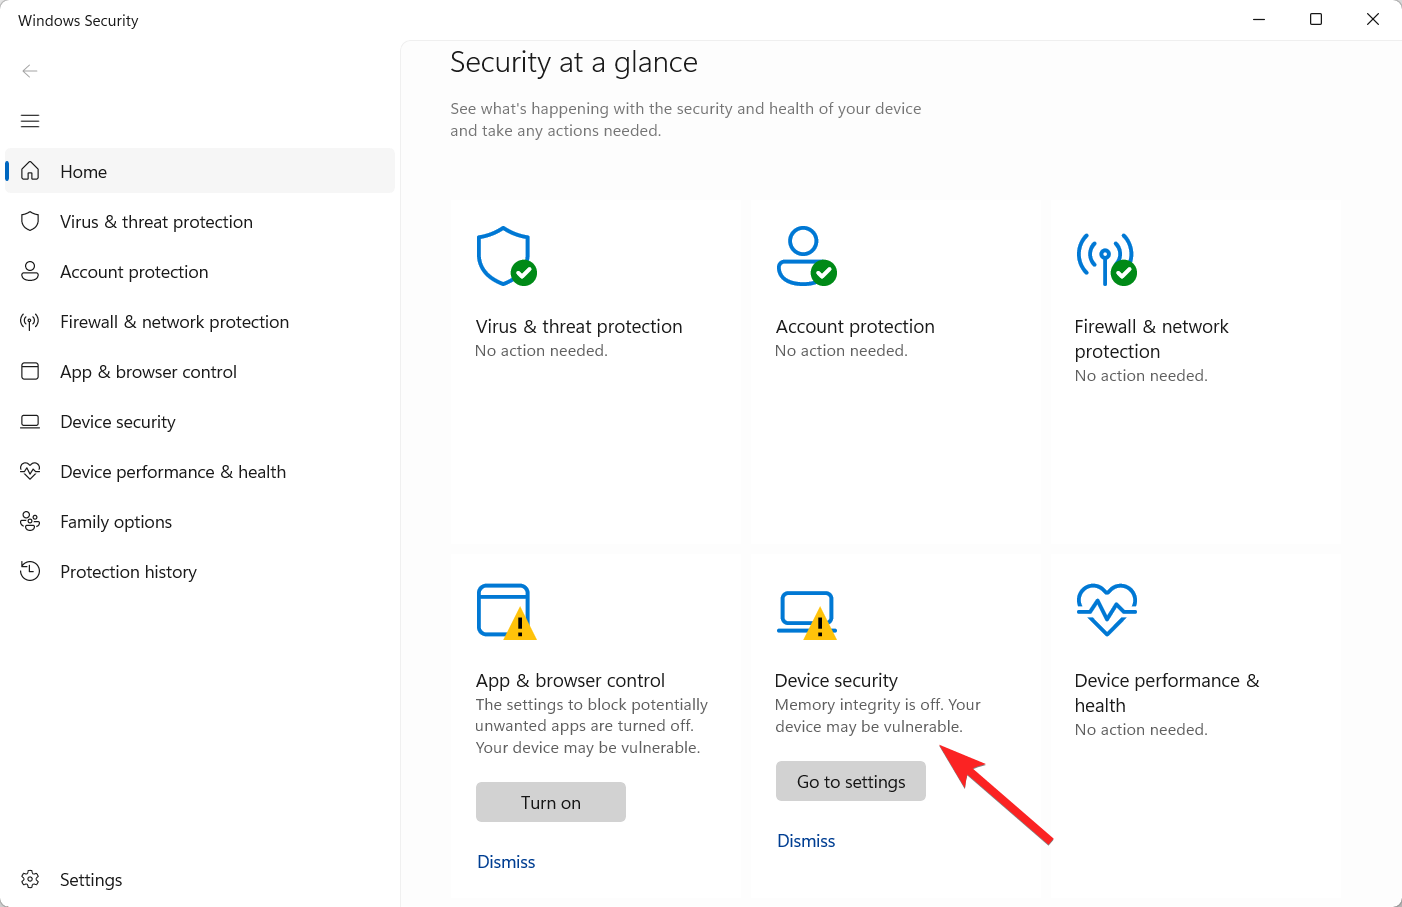 Select Device Security